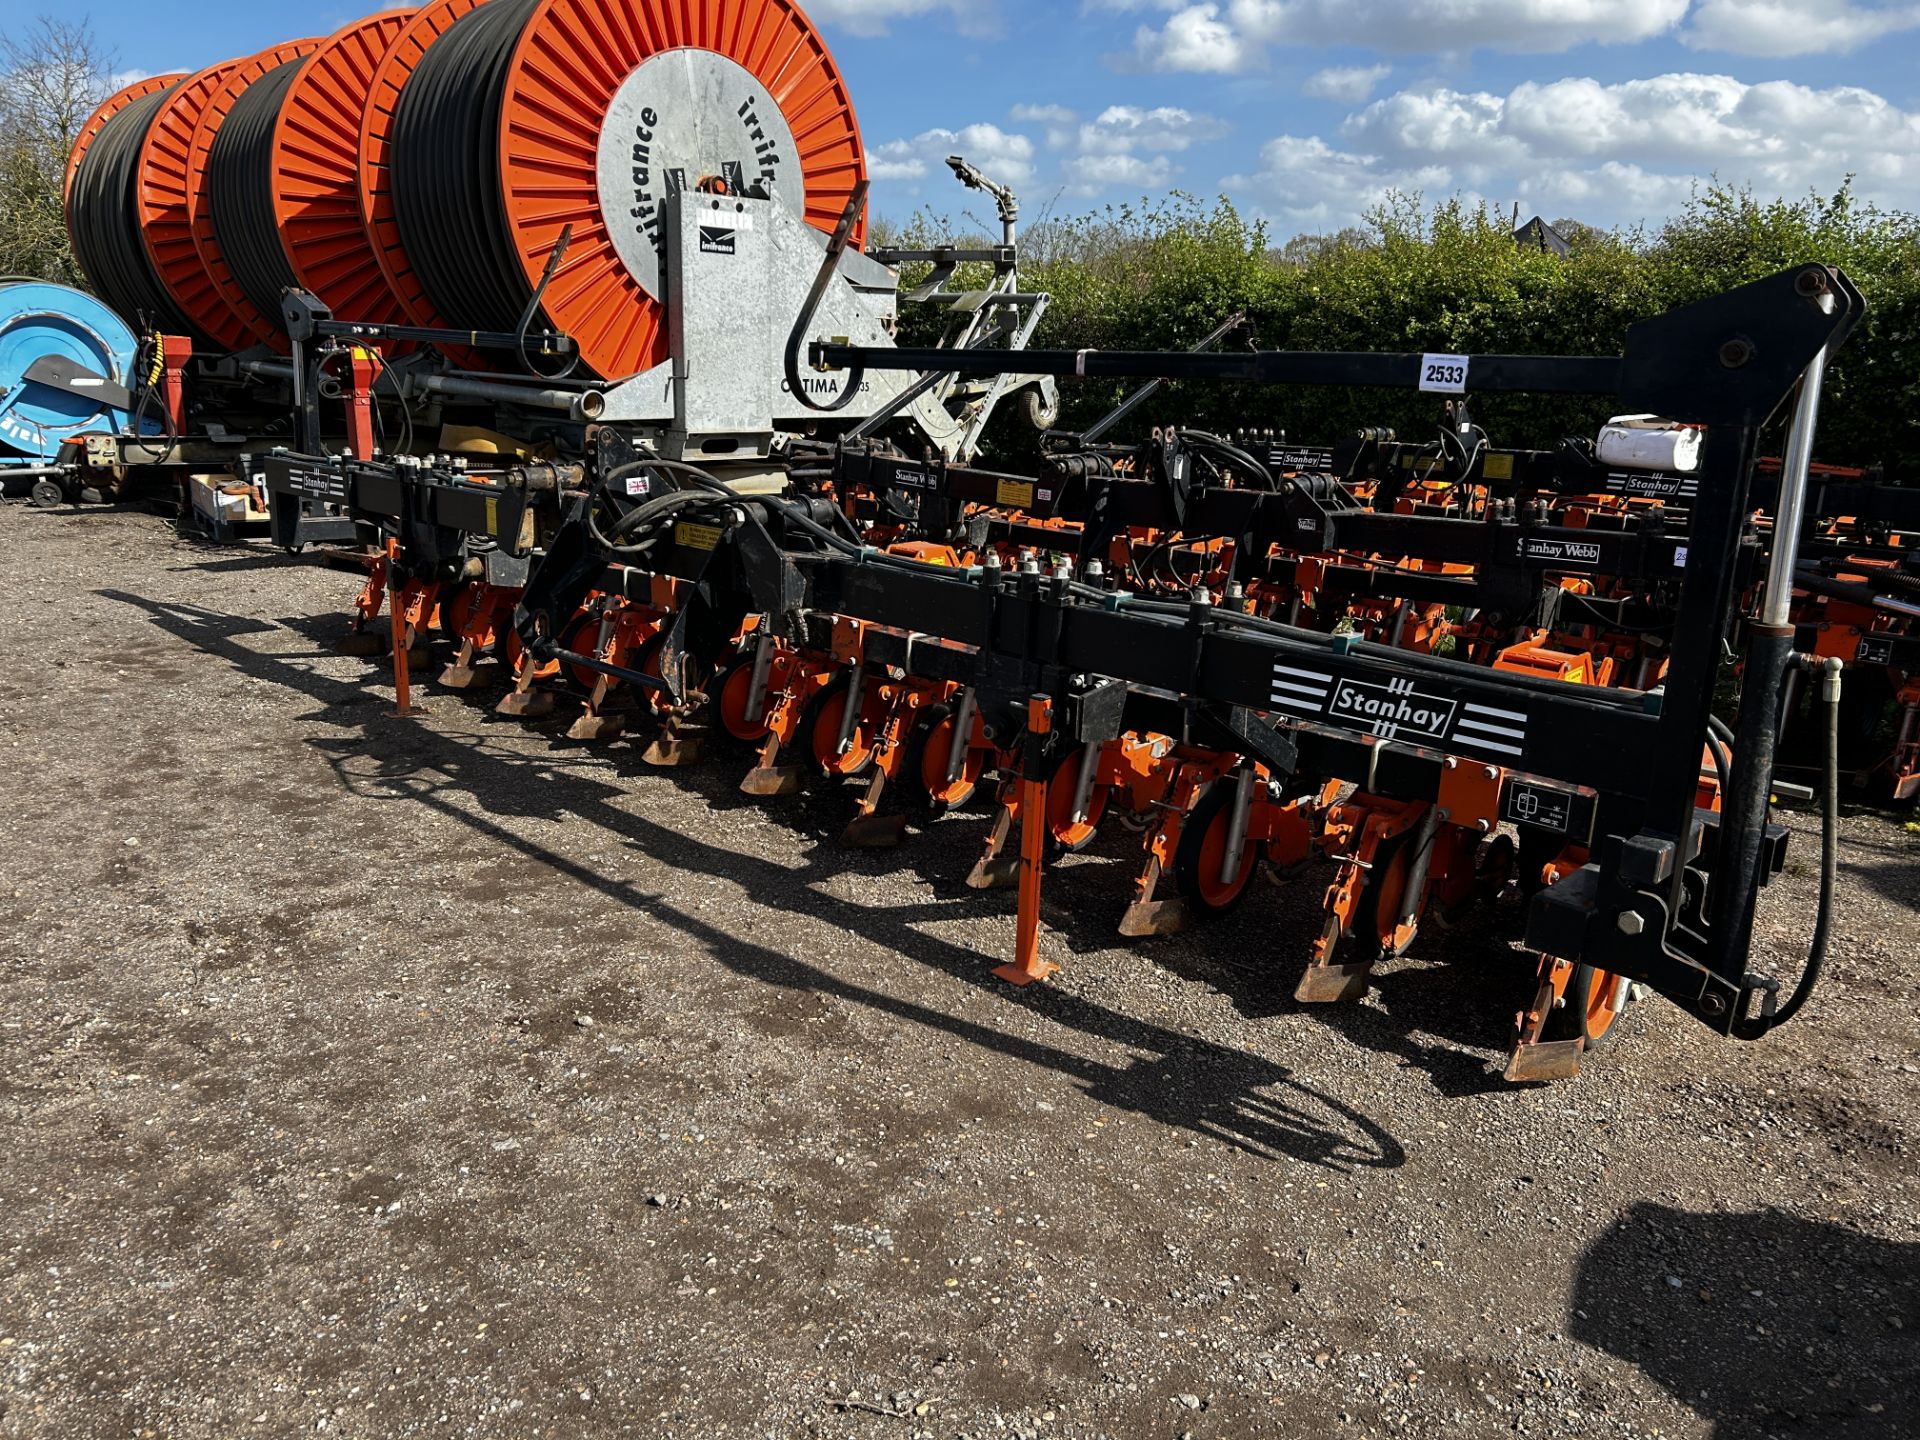 Stanhay Rallye 592 hdraulic folding 12 row beet drill. With bout markers. V - Image 2 of 28